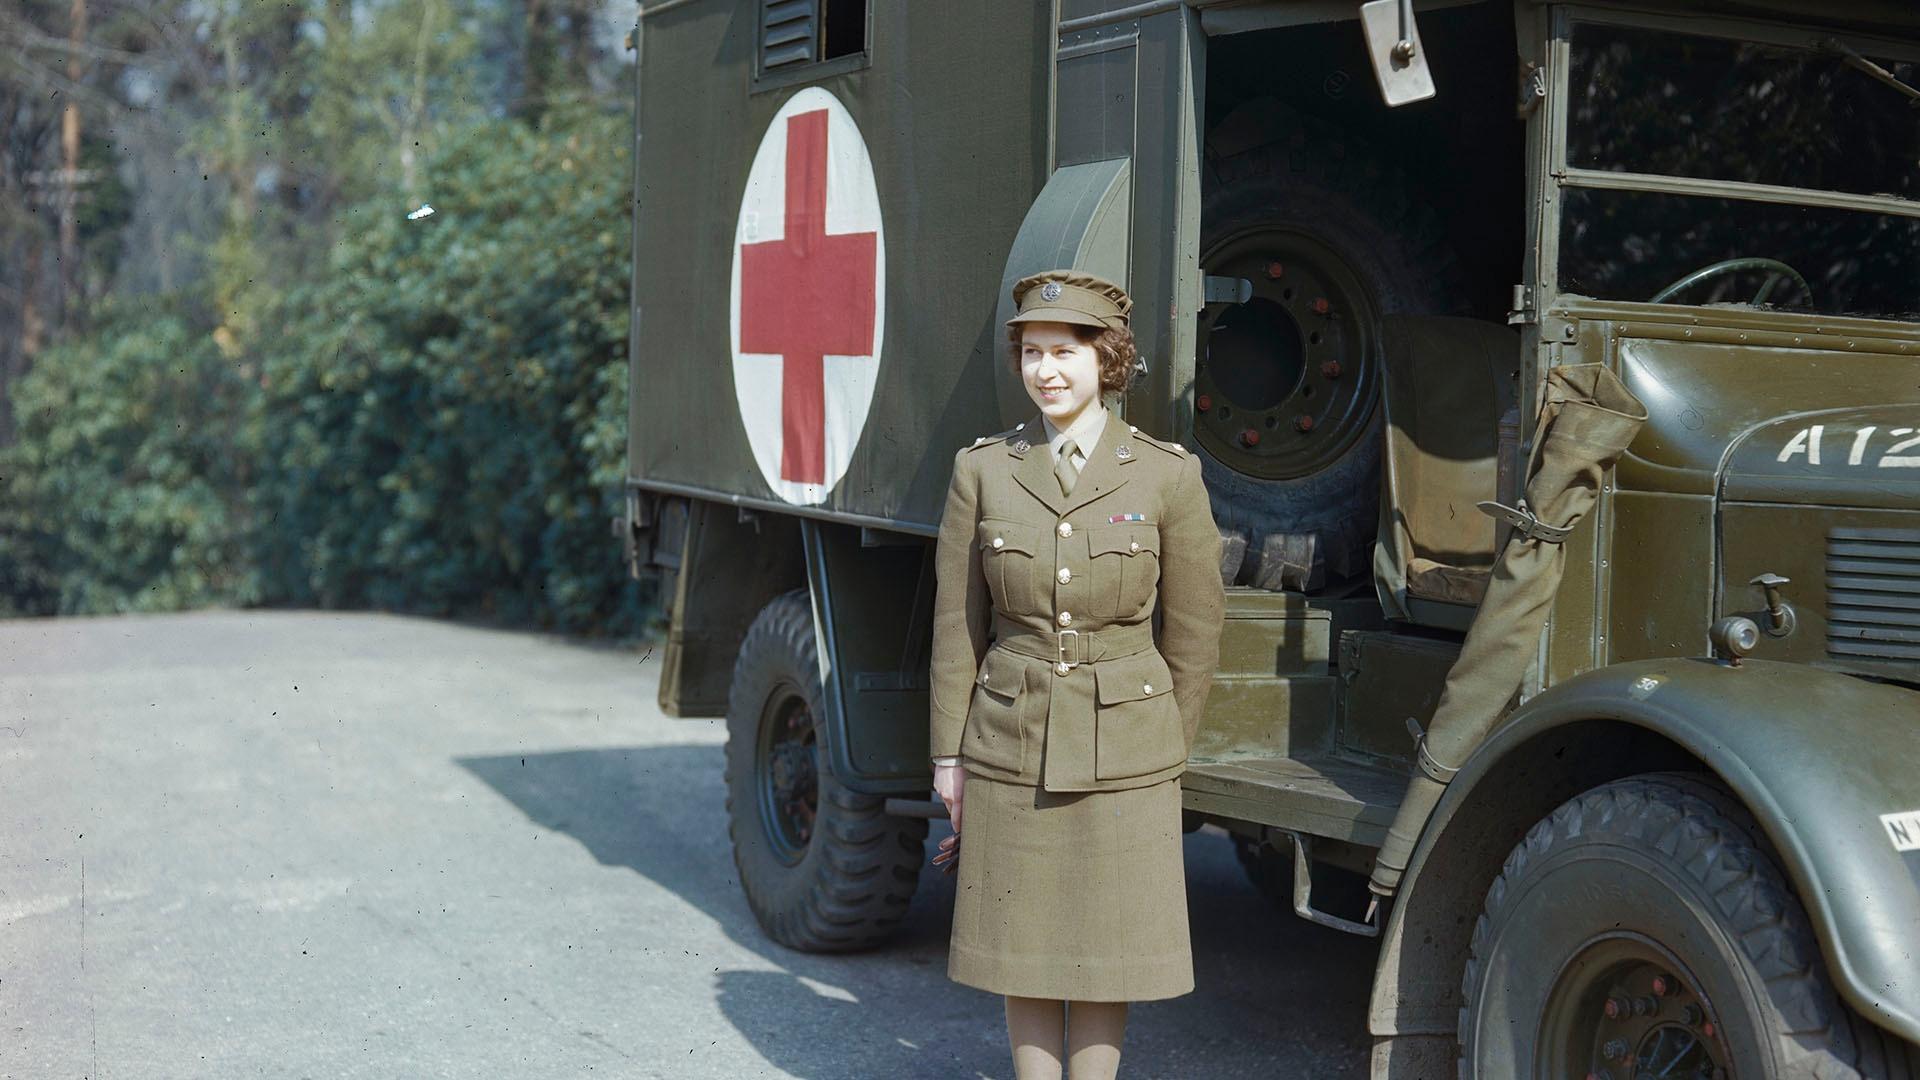 Princess Elizabeth, a 2nd Subaltern in the ATS standing in front of an ambulance.